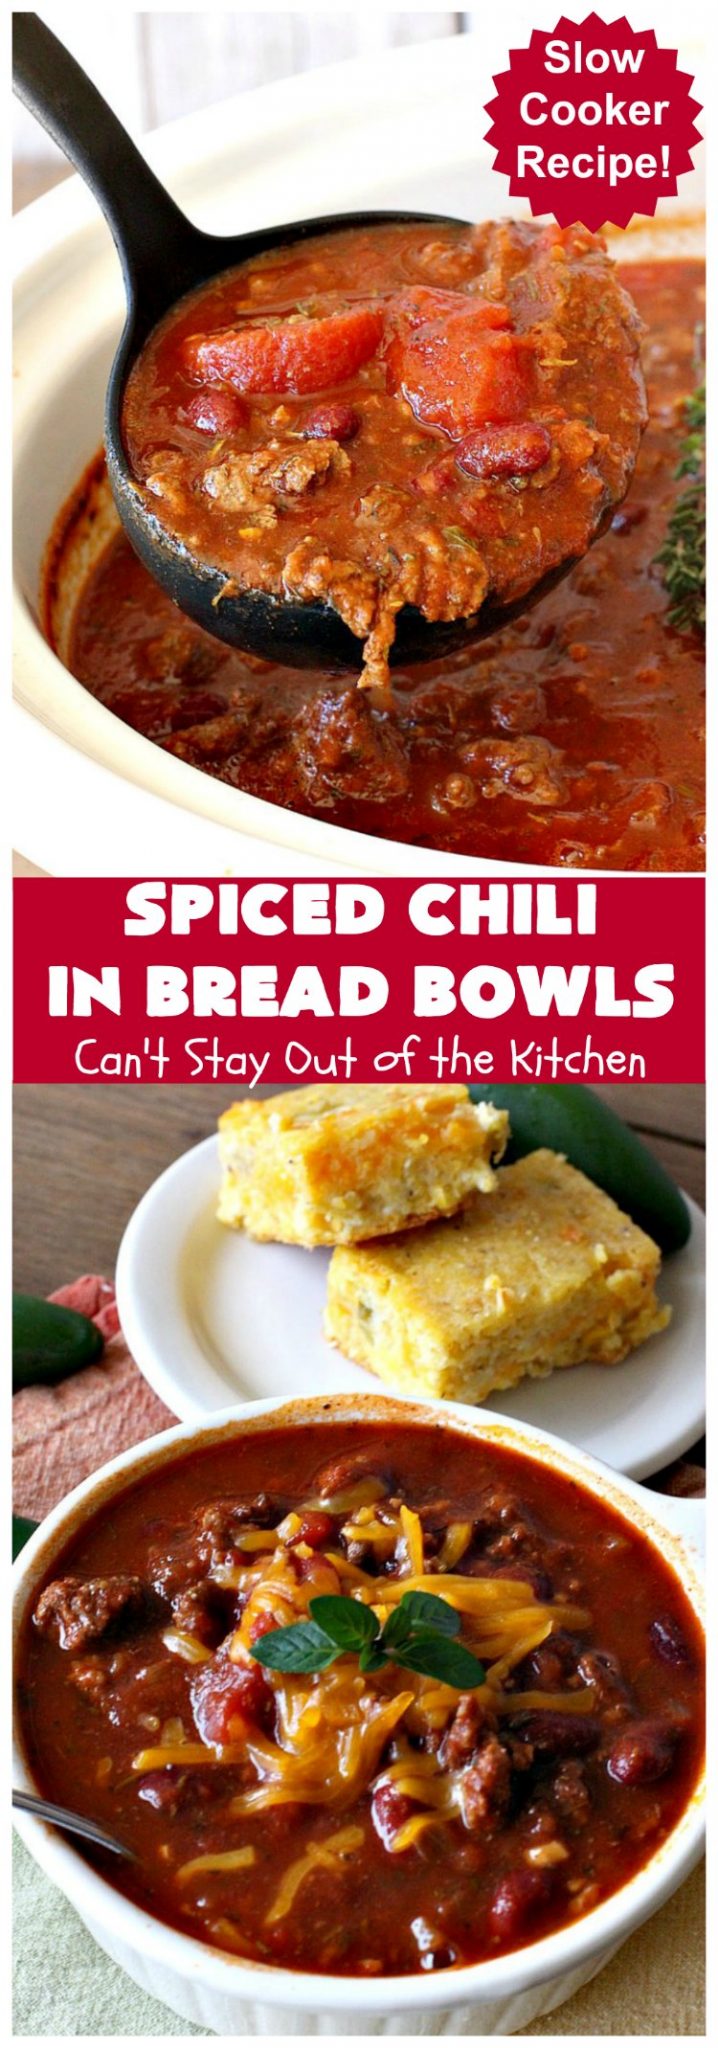 Spiced Chili in Bread Bowls – Can't Stay Out of the Kitchen